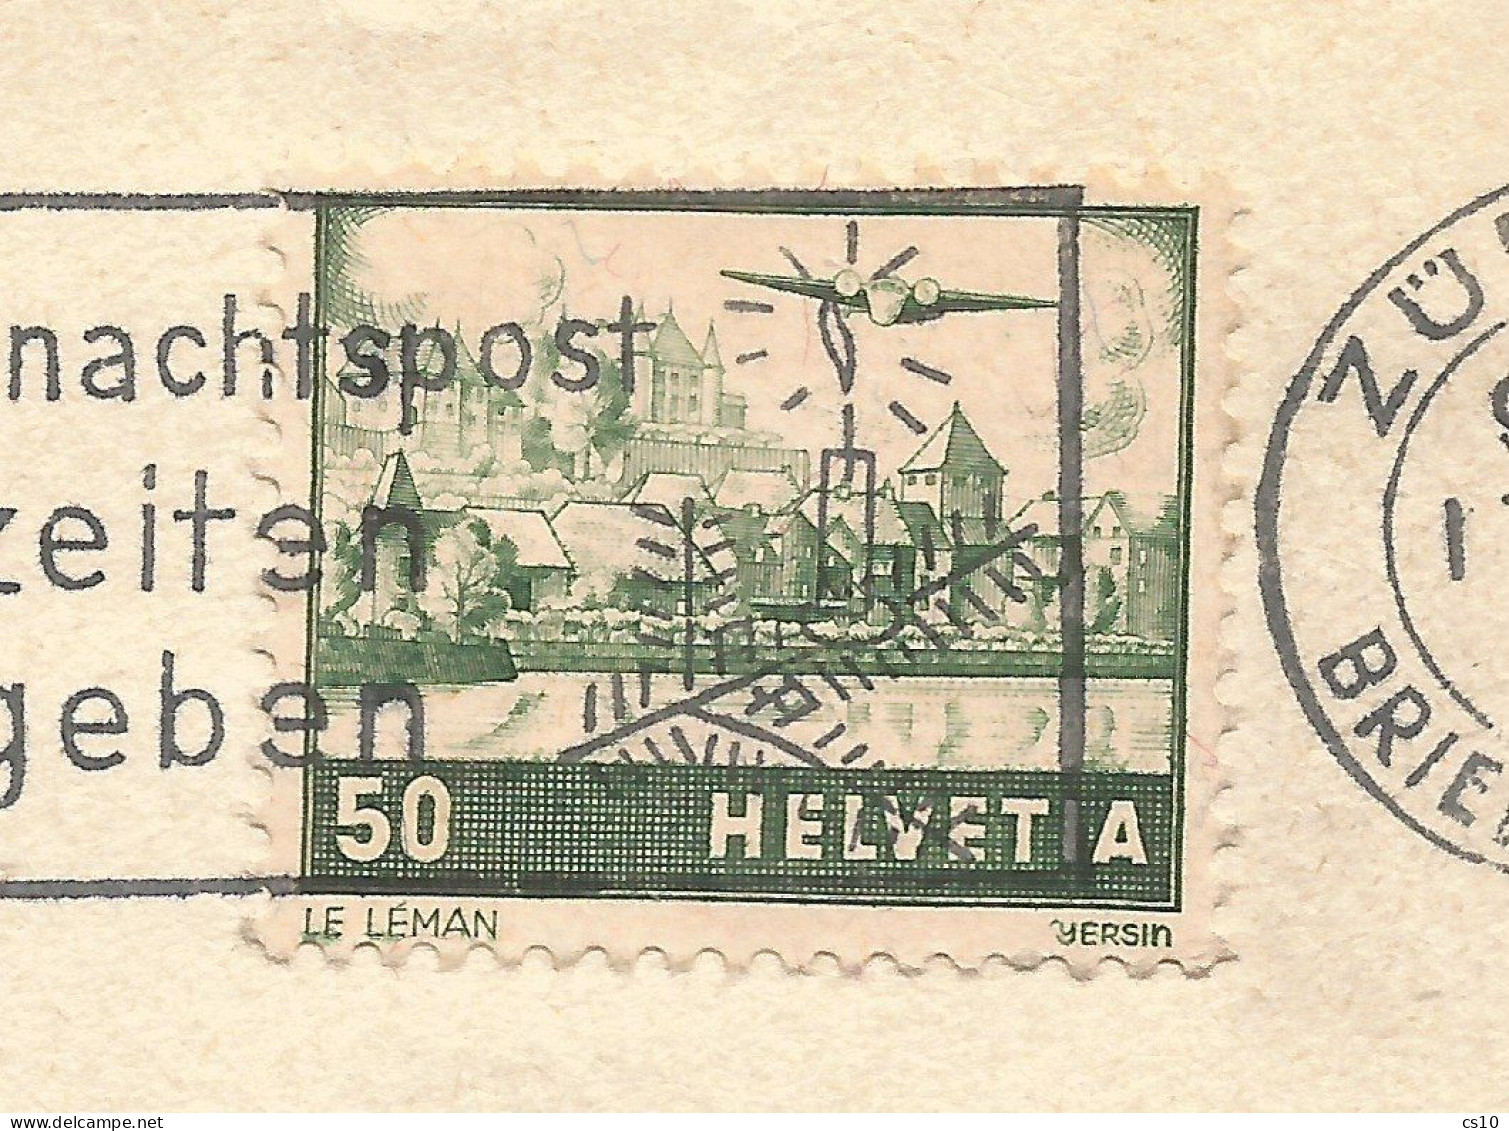 Suisse 1941 Airmail C.50 Green Variety "Weisses Dach" "White Roof" #29a Solo Franking Commerce AirCv To Milano 17dec1946 - Errors & Oddities